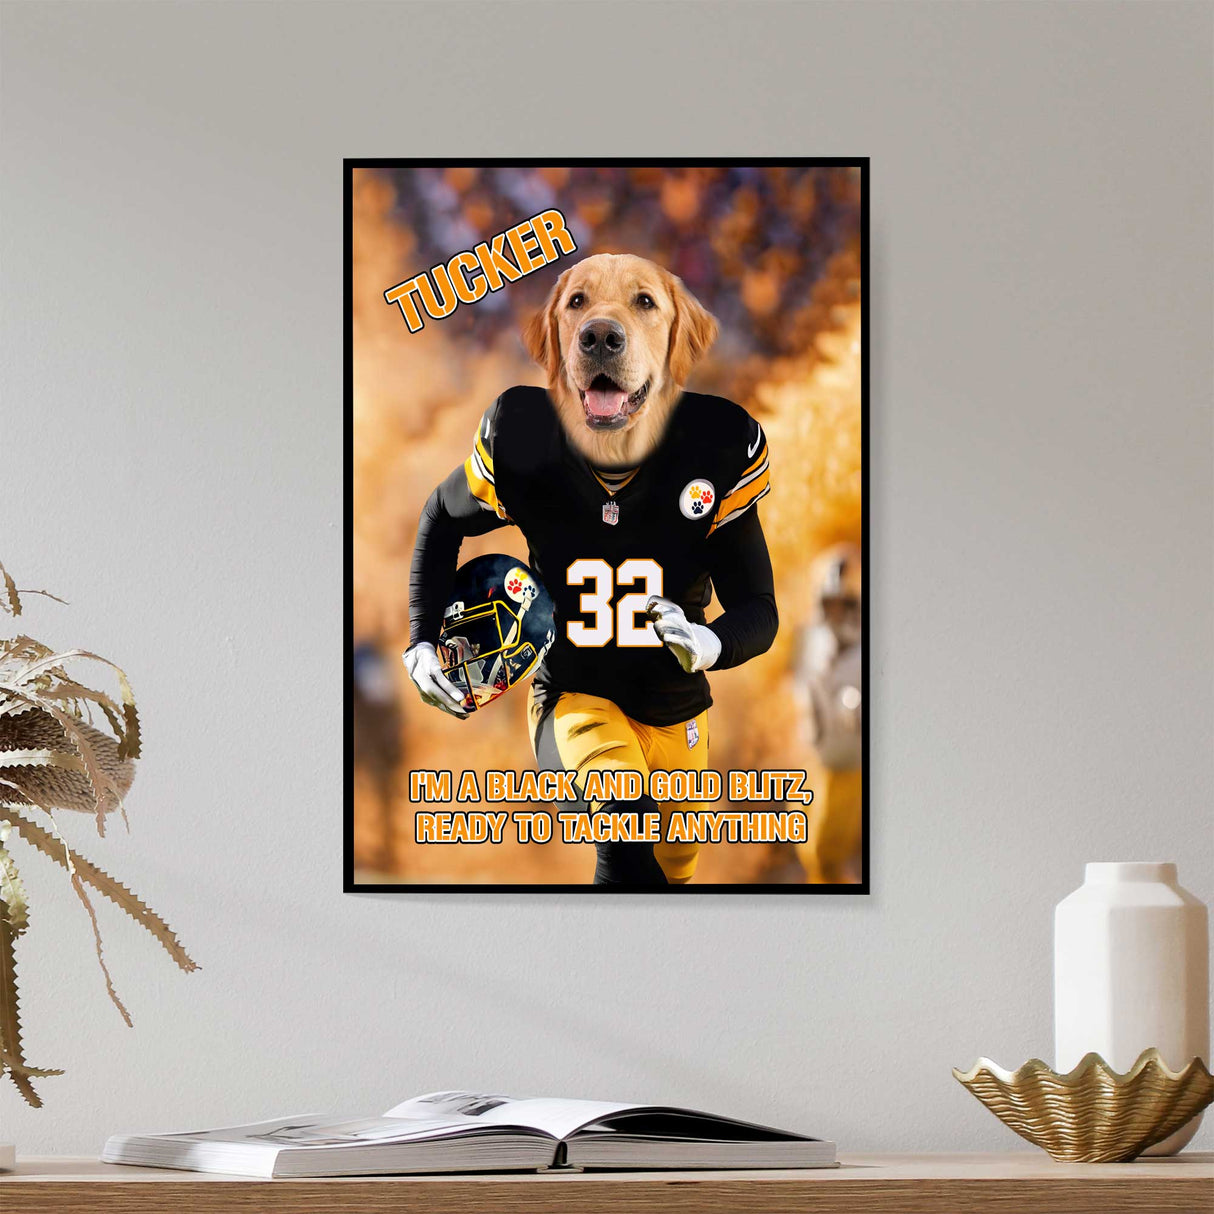 Posters, Prints, & Visual Artwork Dog Lovers - PITTSBURGH STEELERS Football Canvas 3 Pets - Personalized Pet Poster Canvas Print